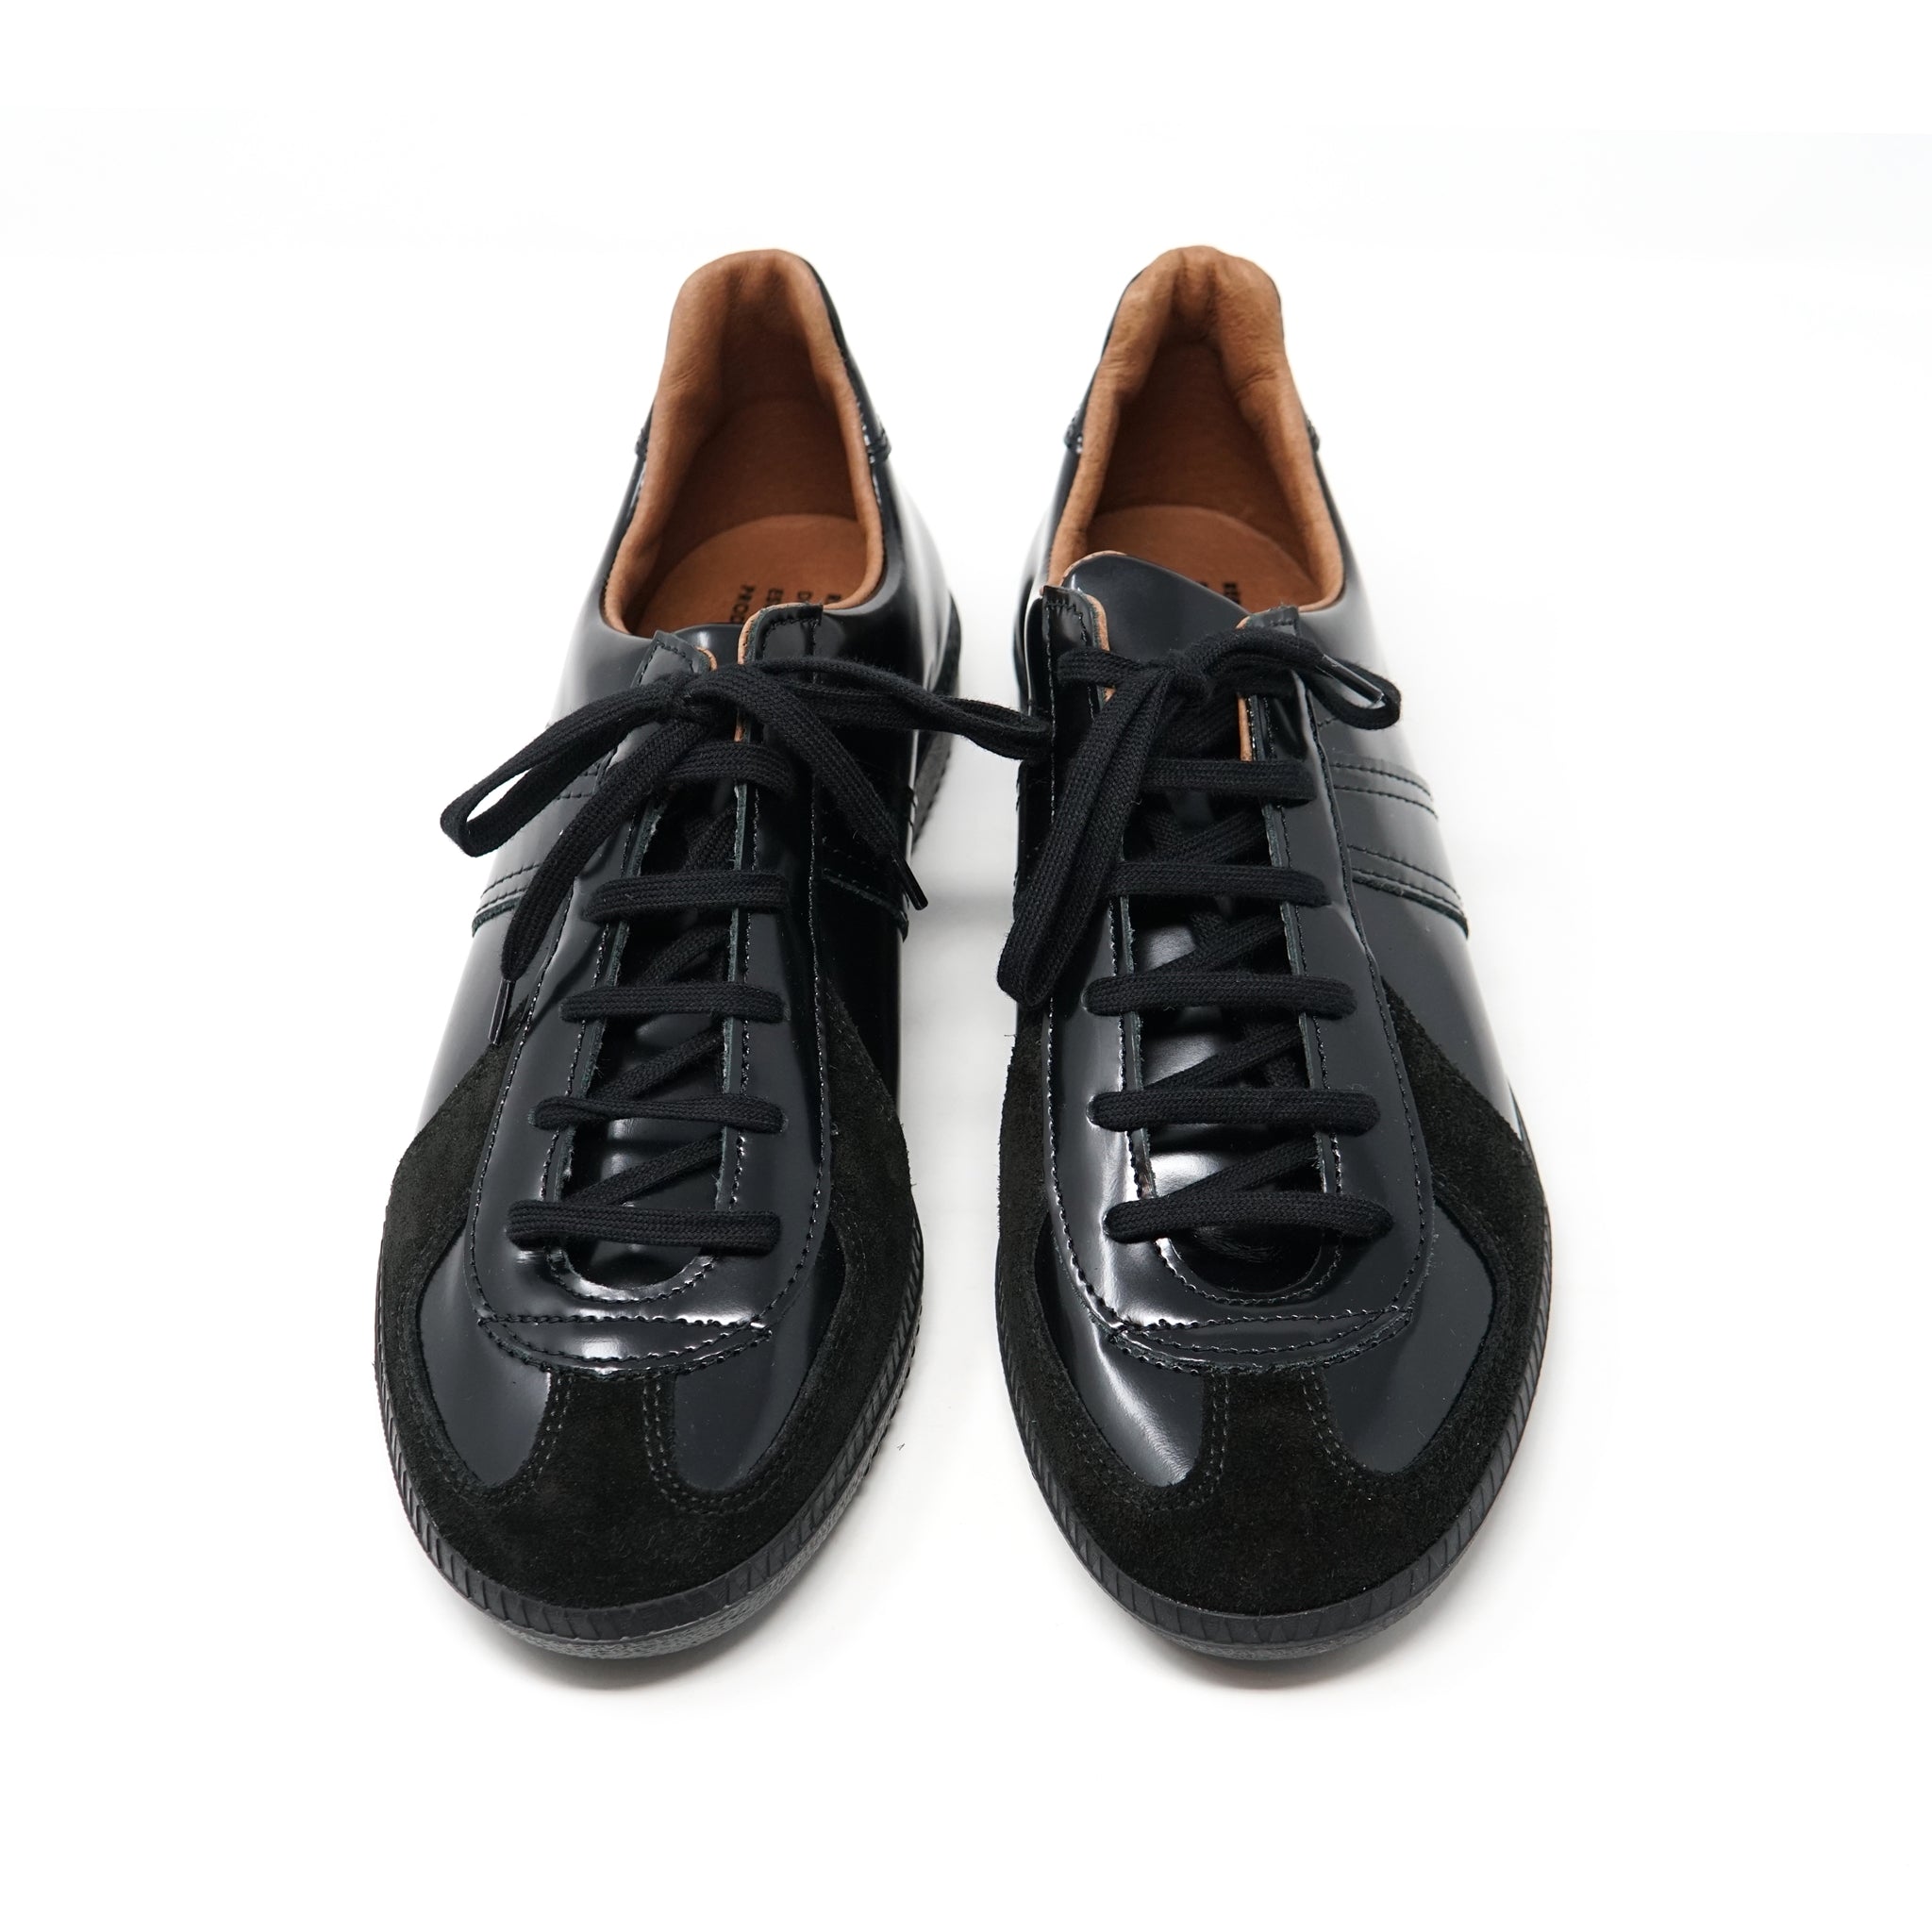 No:1700lux | Name:GERMAN MILITARY TRAINER  | Color:Black【REPRODUCTION OF FOUND_リプロダクションオブファウンド】